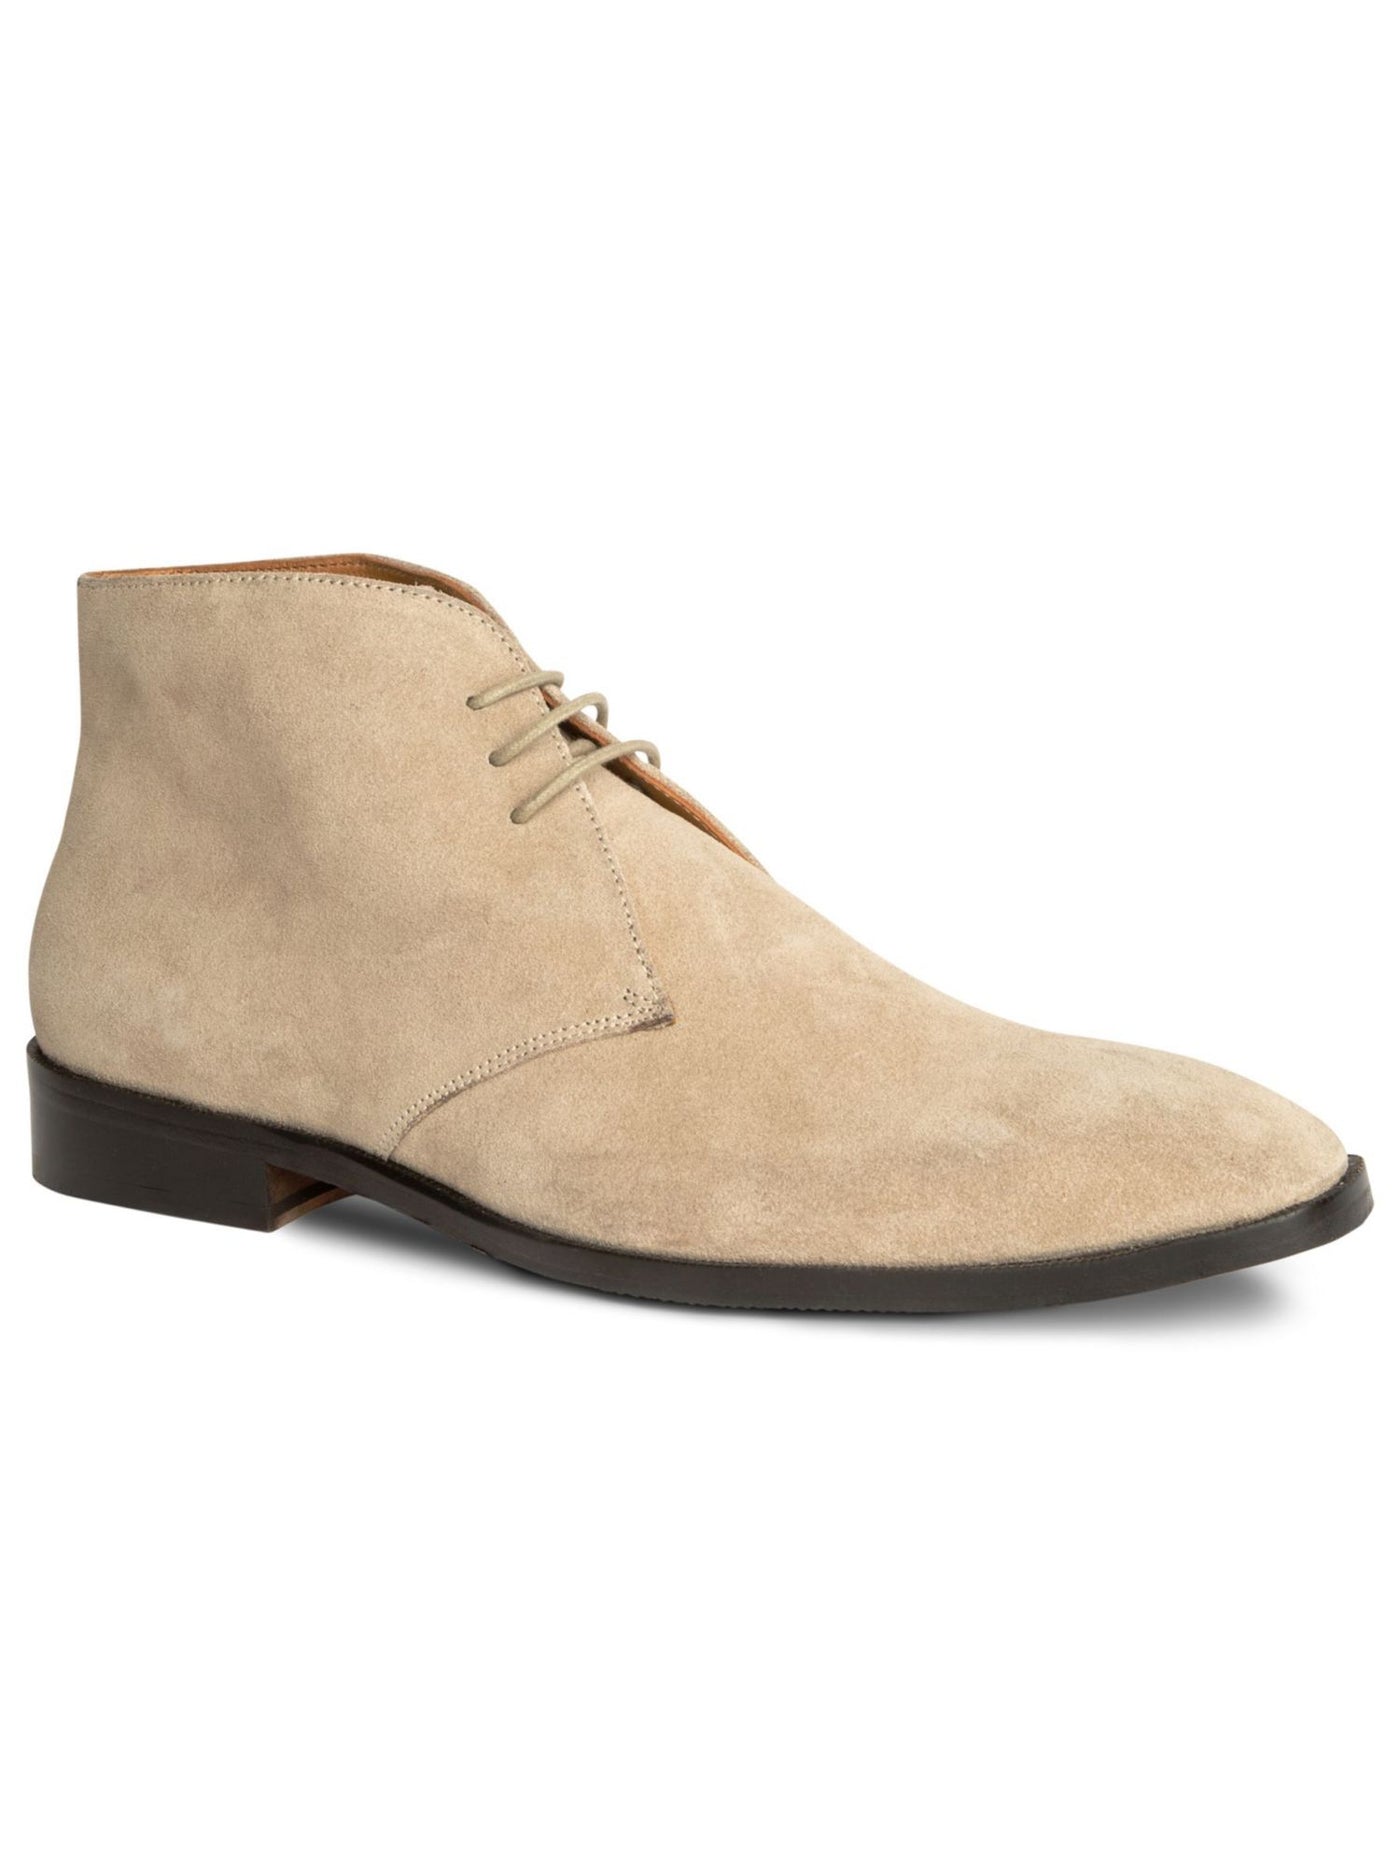 CARLOS BY CARLOS SANTANA Mens Beige Cushioned Corazon Almond Toe Lace-Up Leather Chukka Boots 10.5